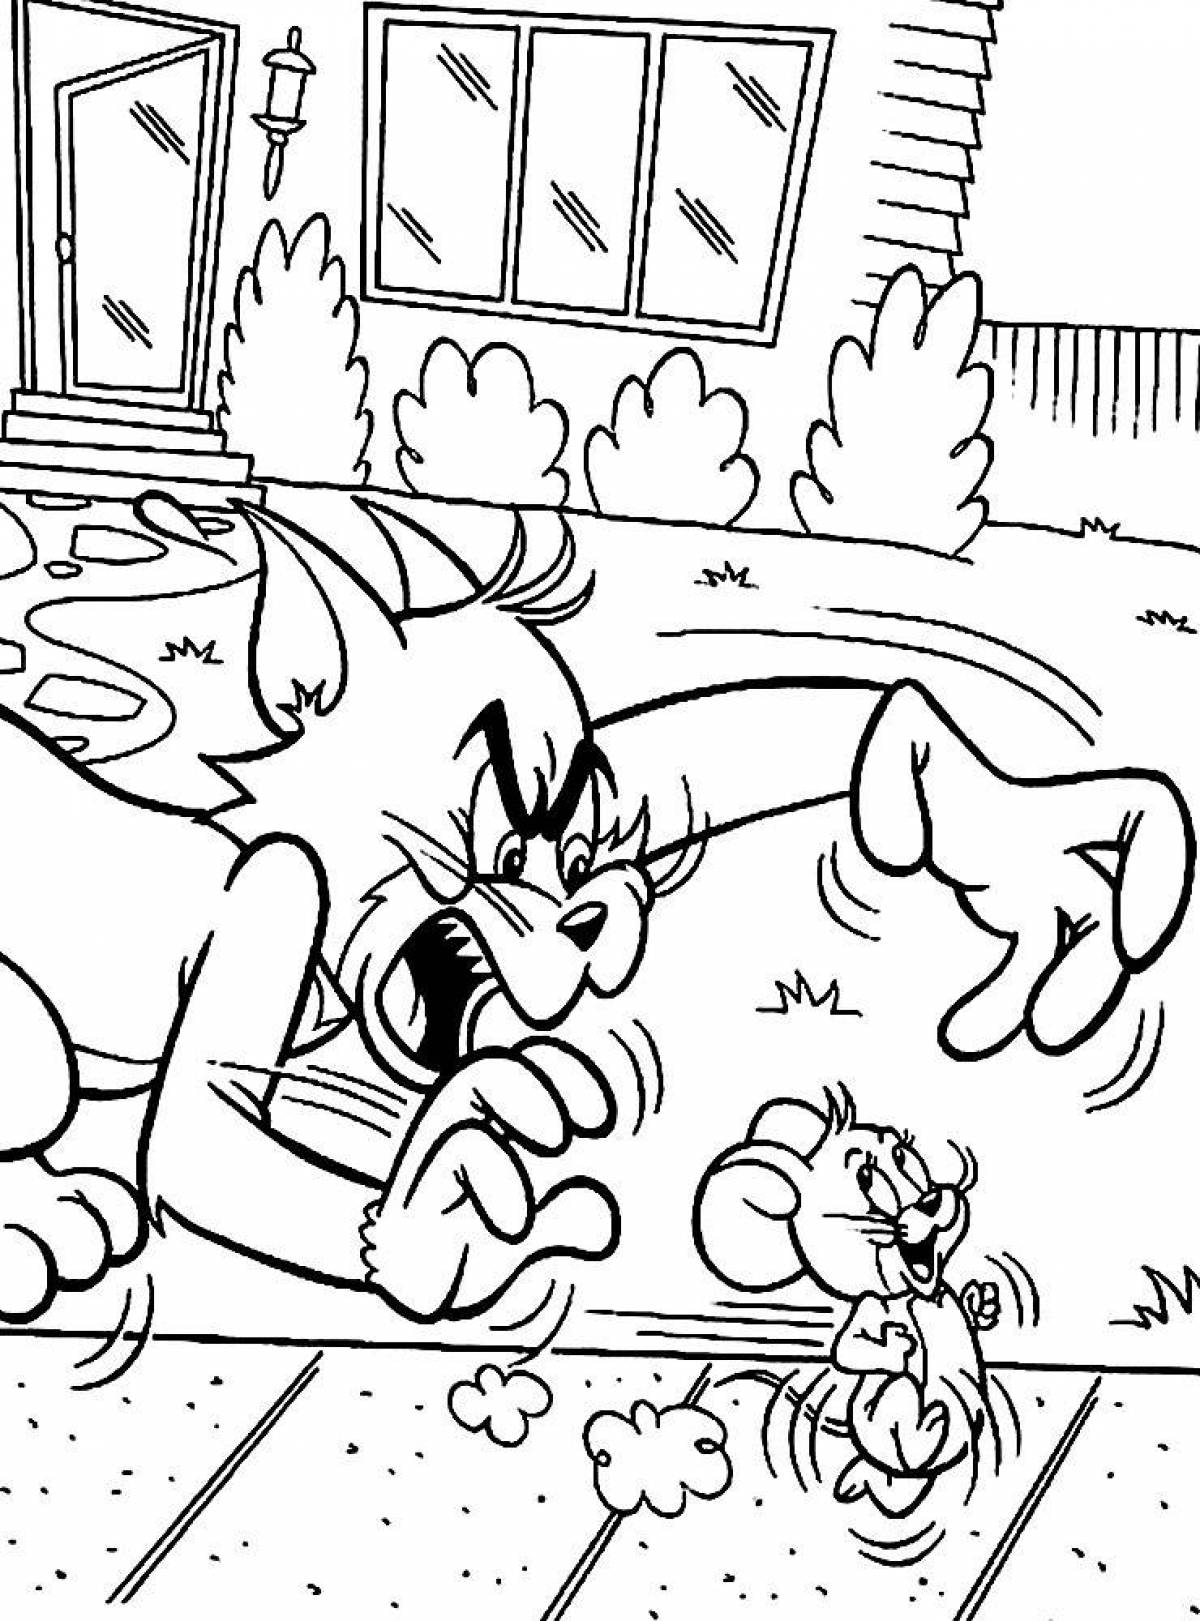 Fabulous coloring pages tom and jerry for kids